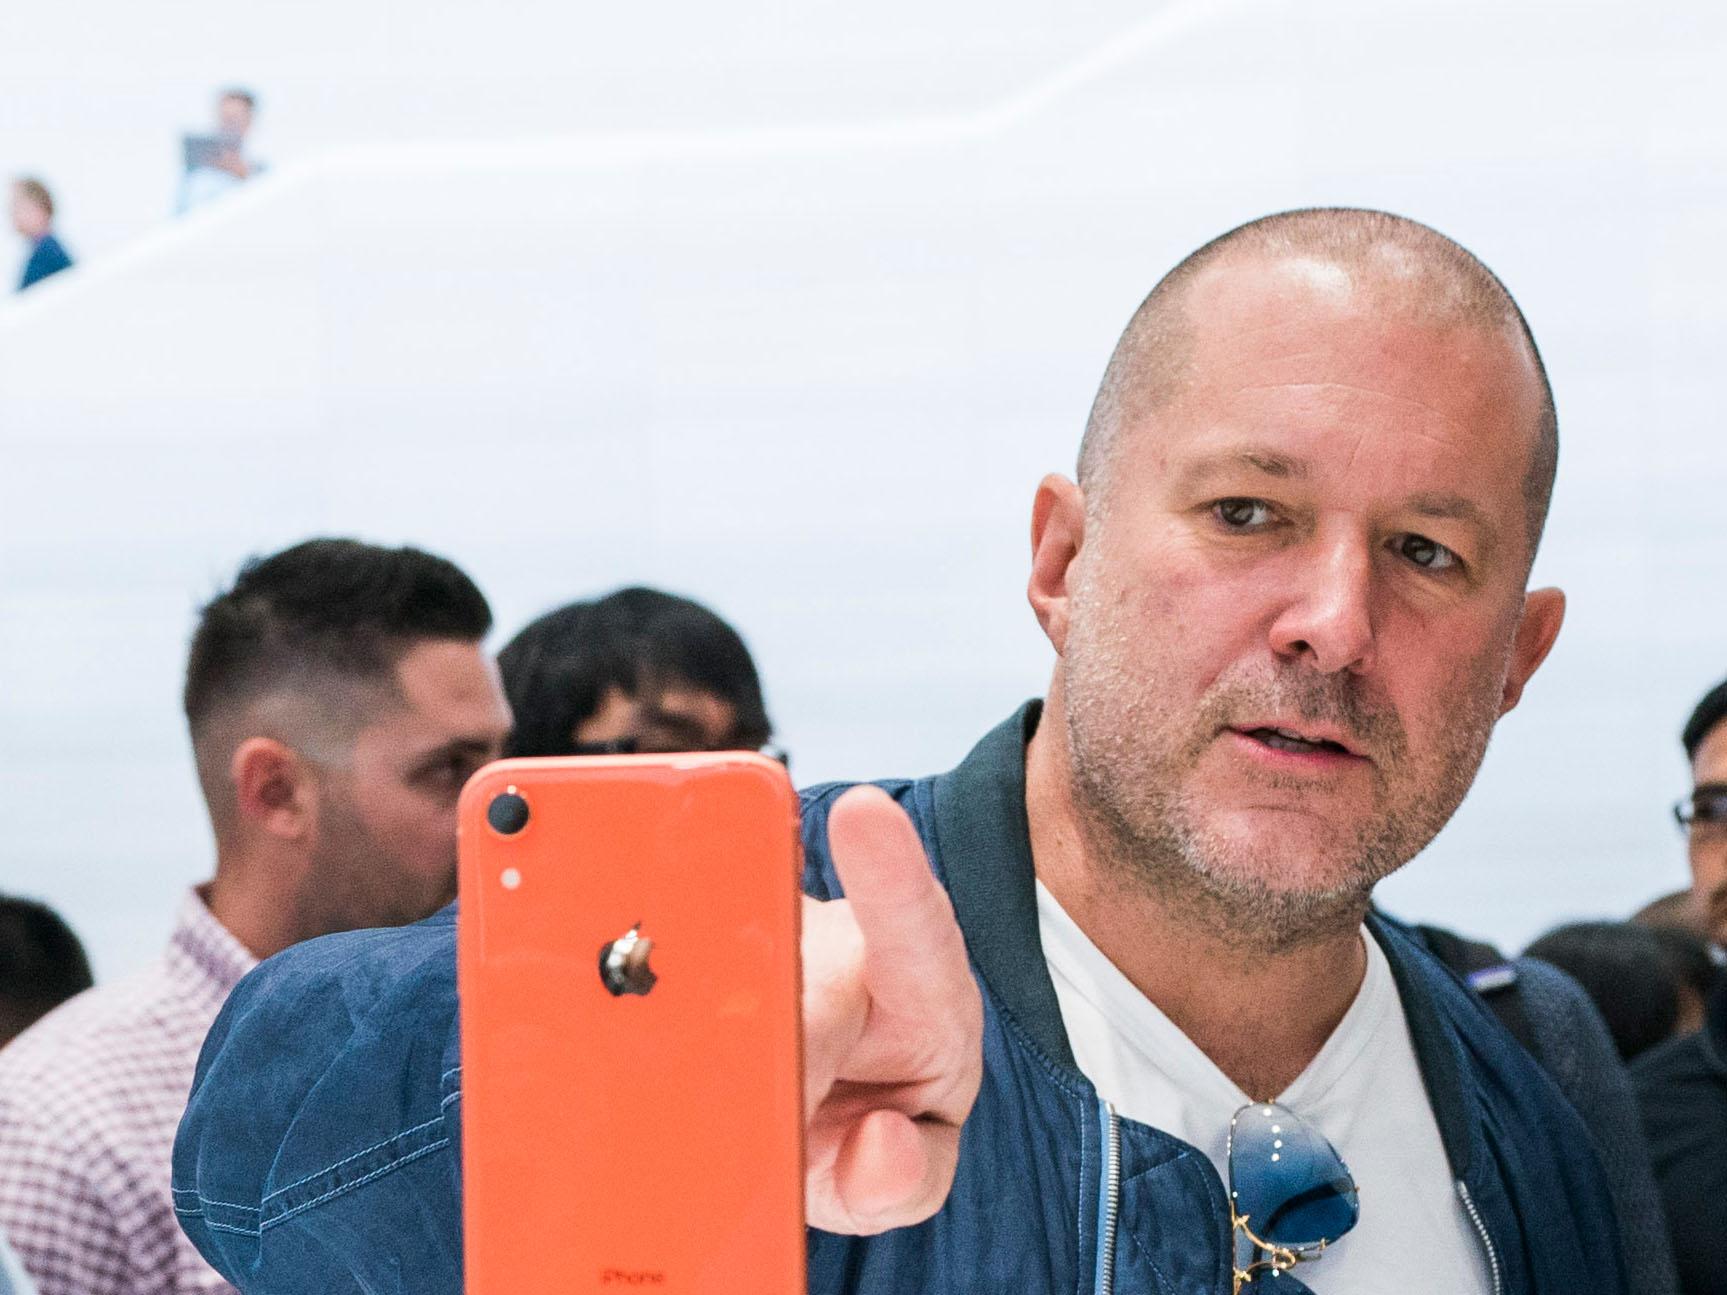 5 things to know about Marc Newson, Jony Ive's longtime design partner